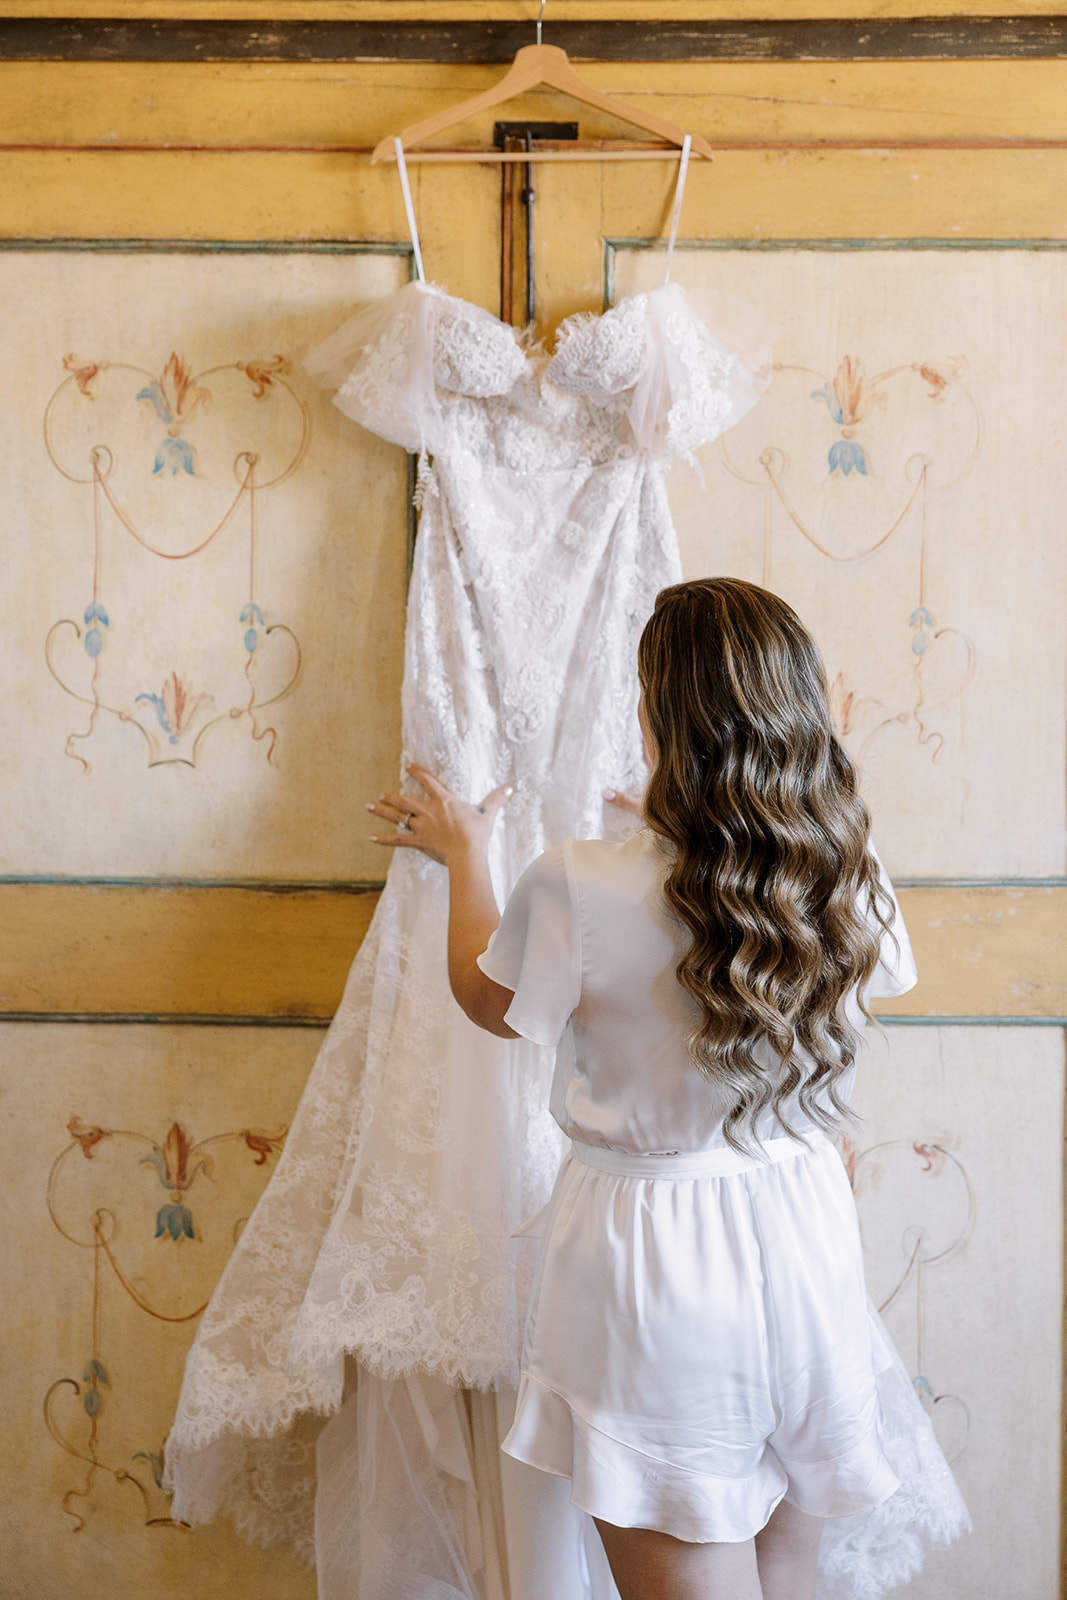 bride looks at her dress handing on the wall